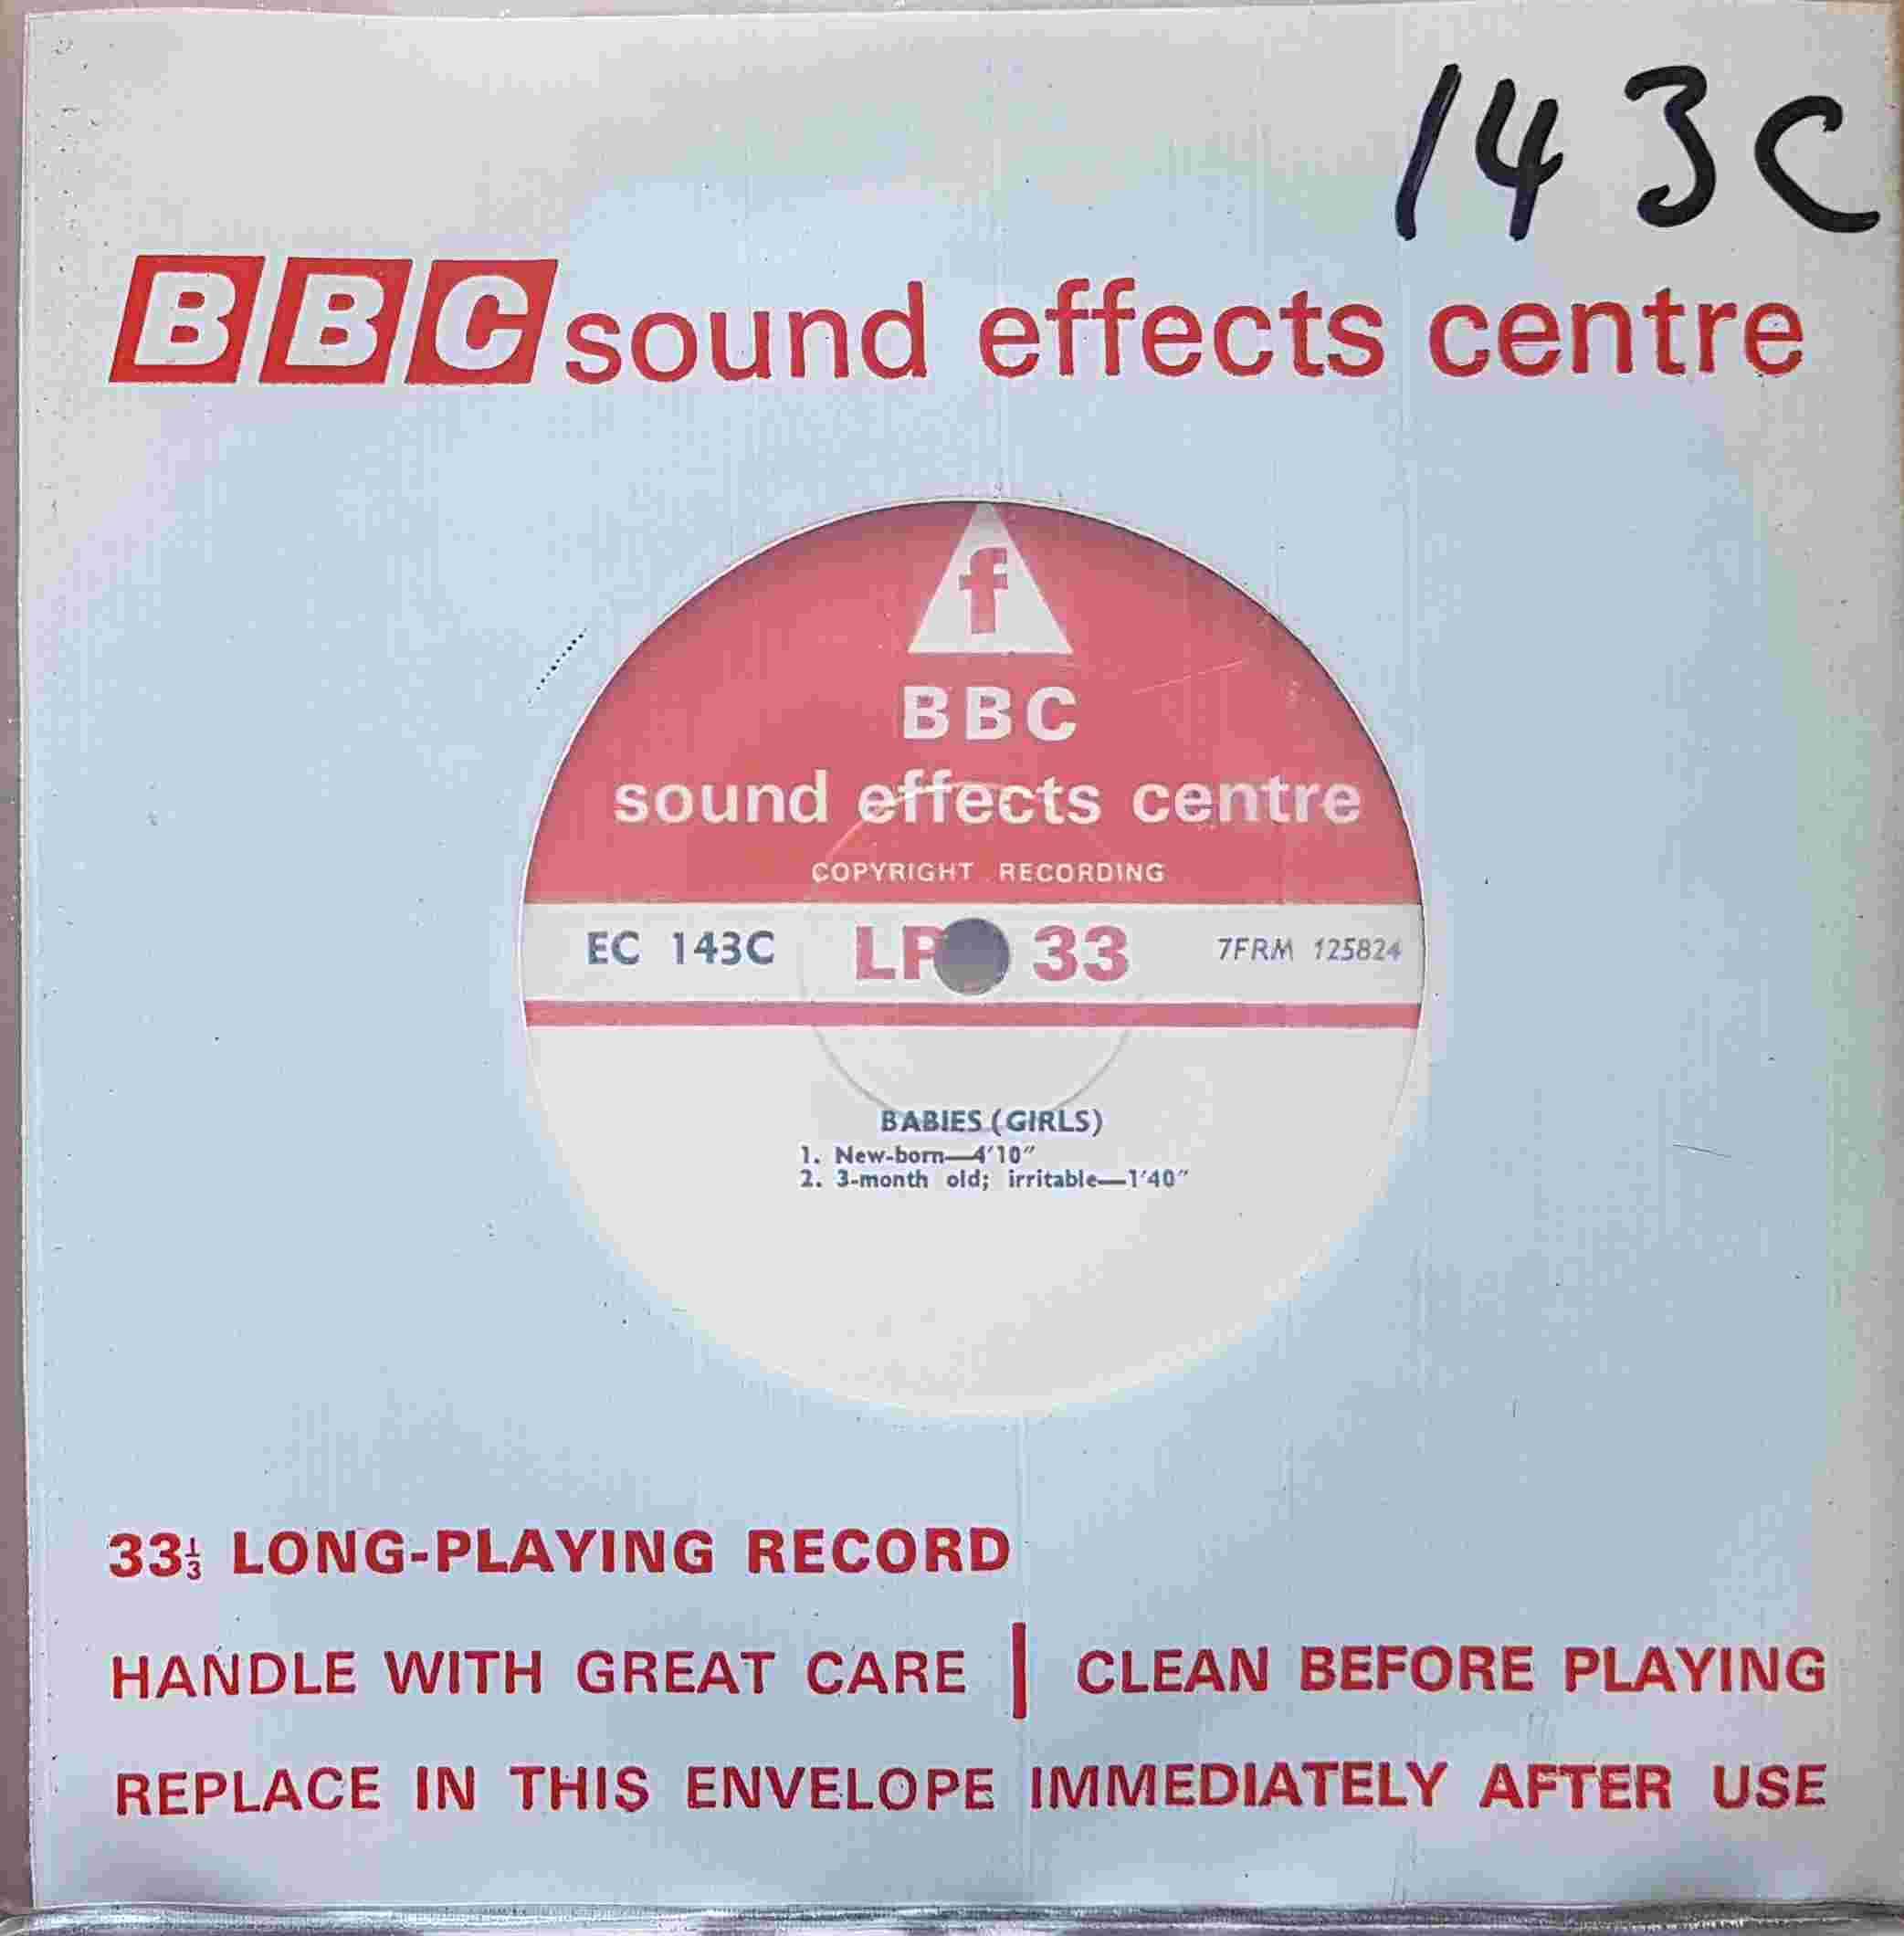 Picture of EC 143C Babies (Girls) by artist Not registered from the BBC records and Tapes library